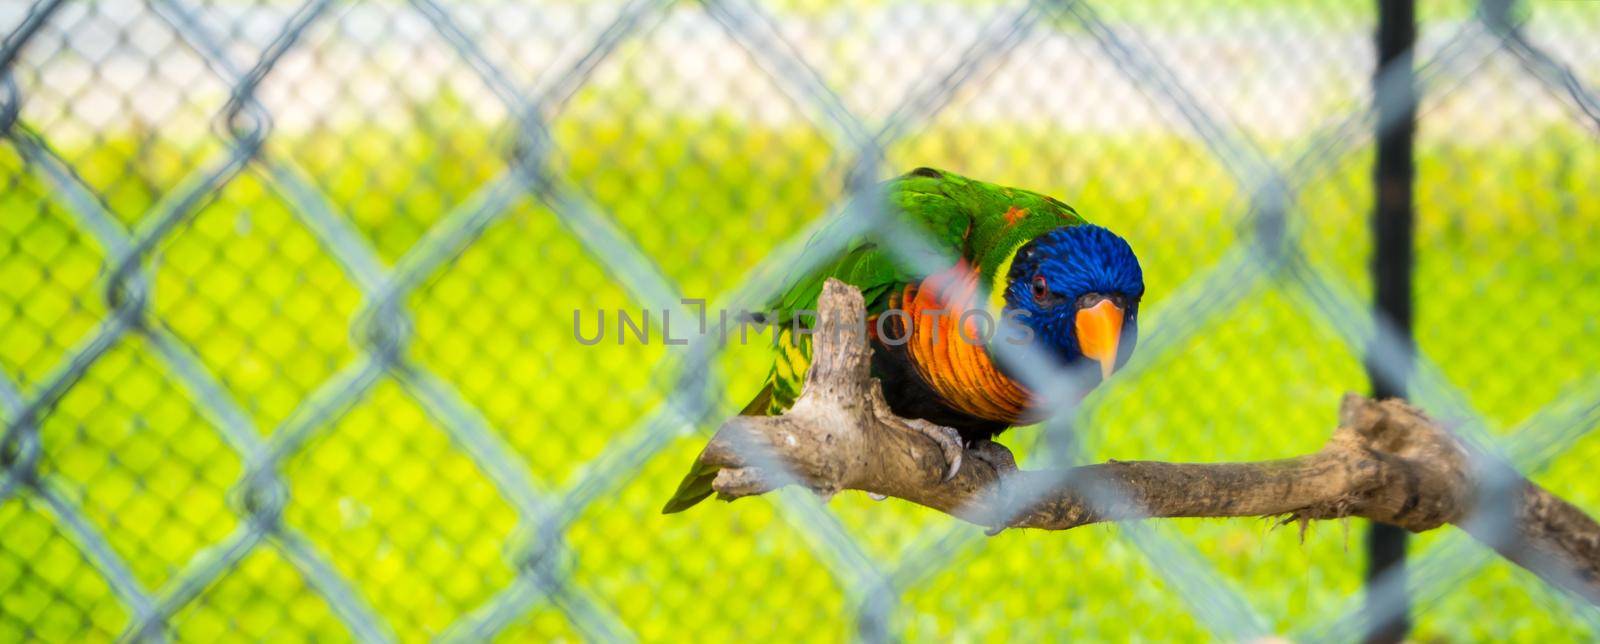 The Colorful Parrot trapped in a cage